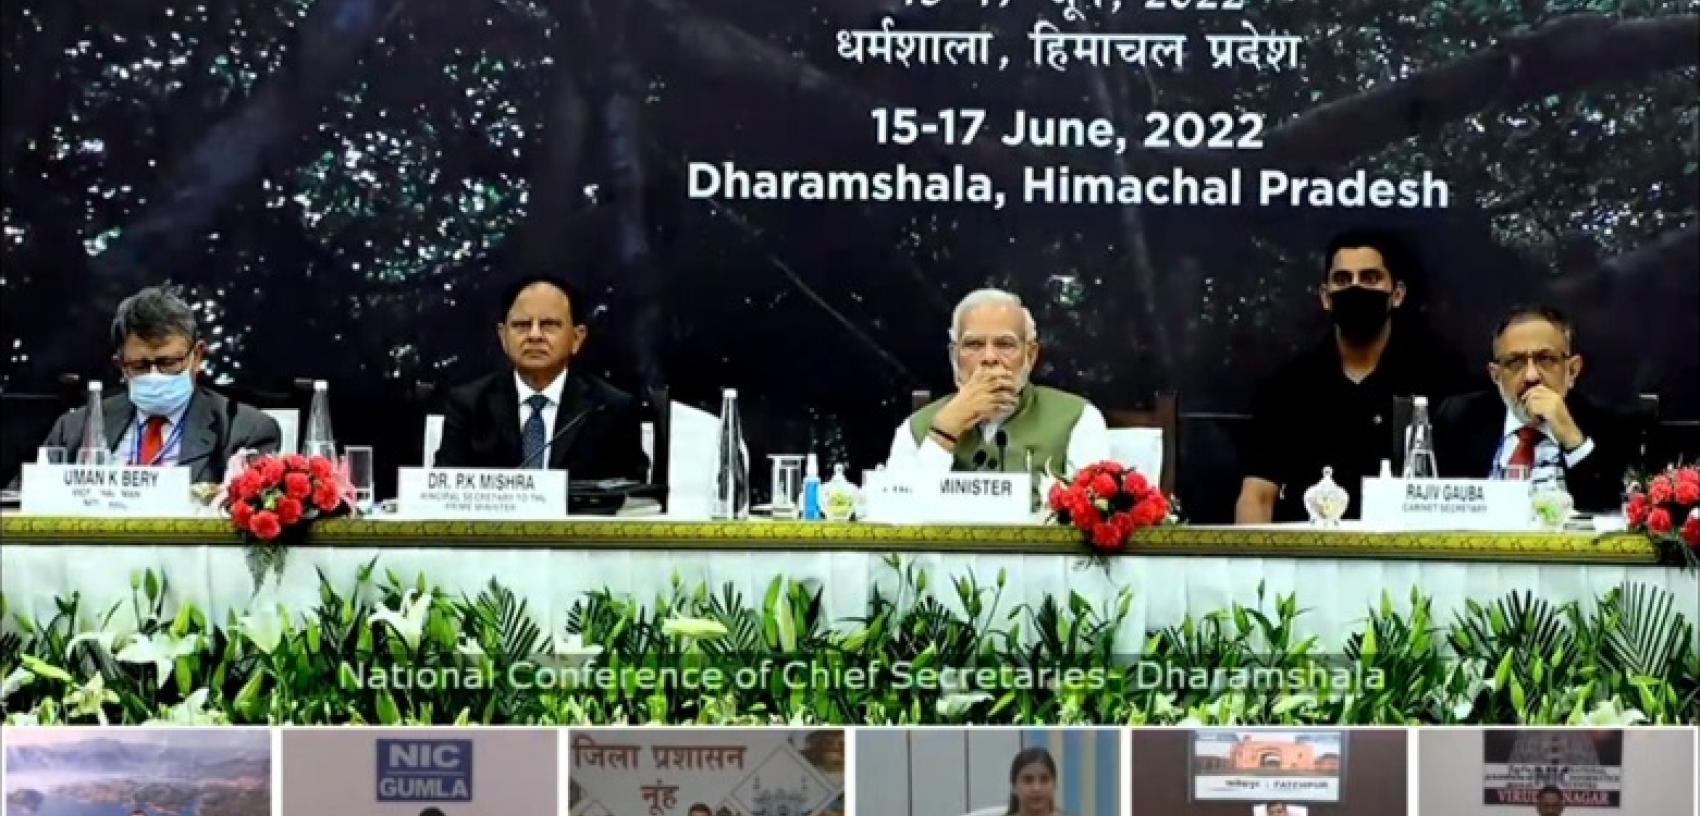 Hon'ble Prime Minister of India addressing the Chief Secretaries in the Conference